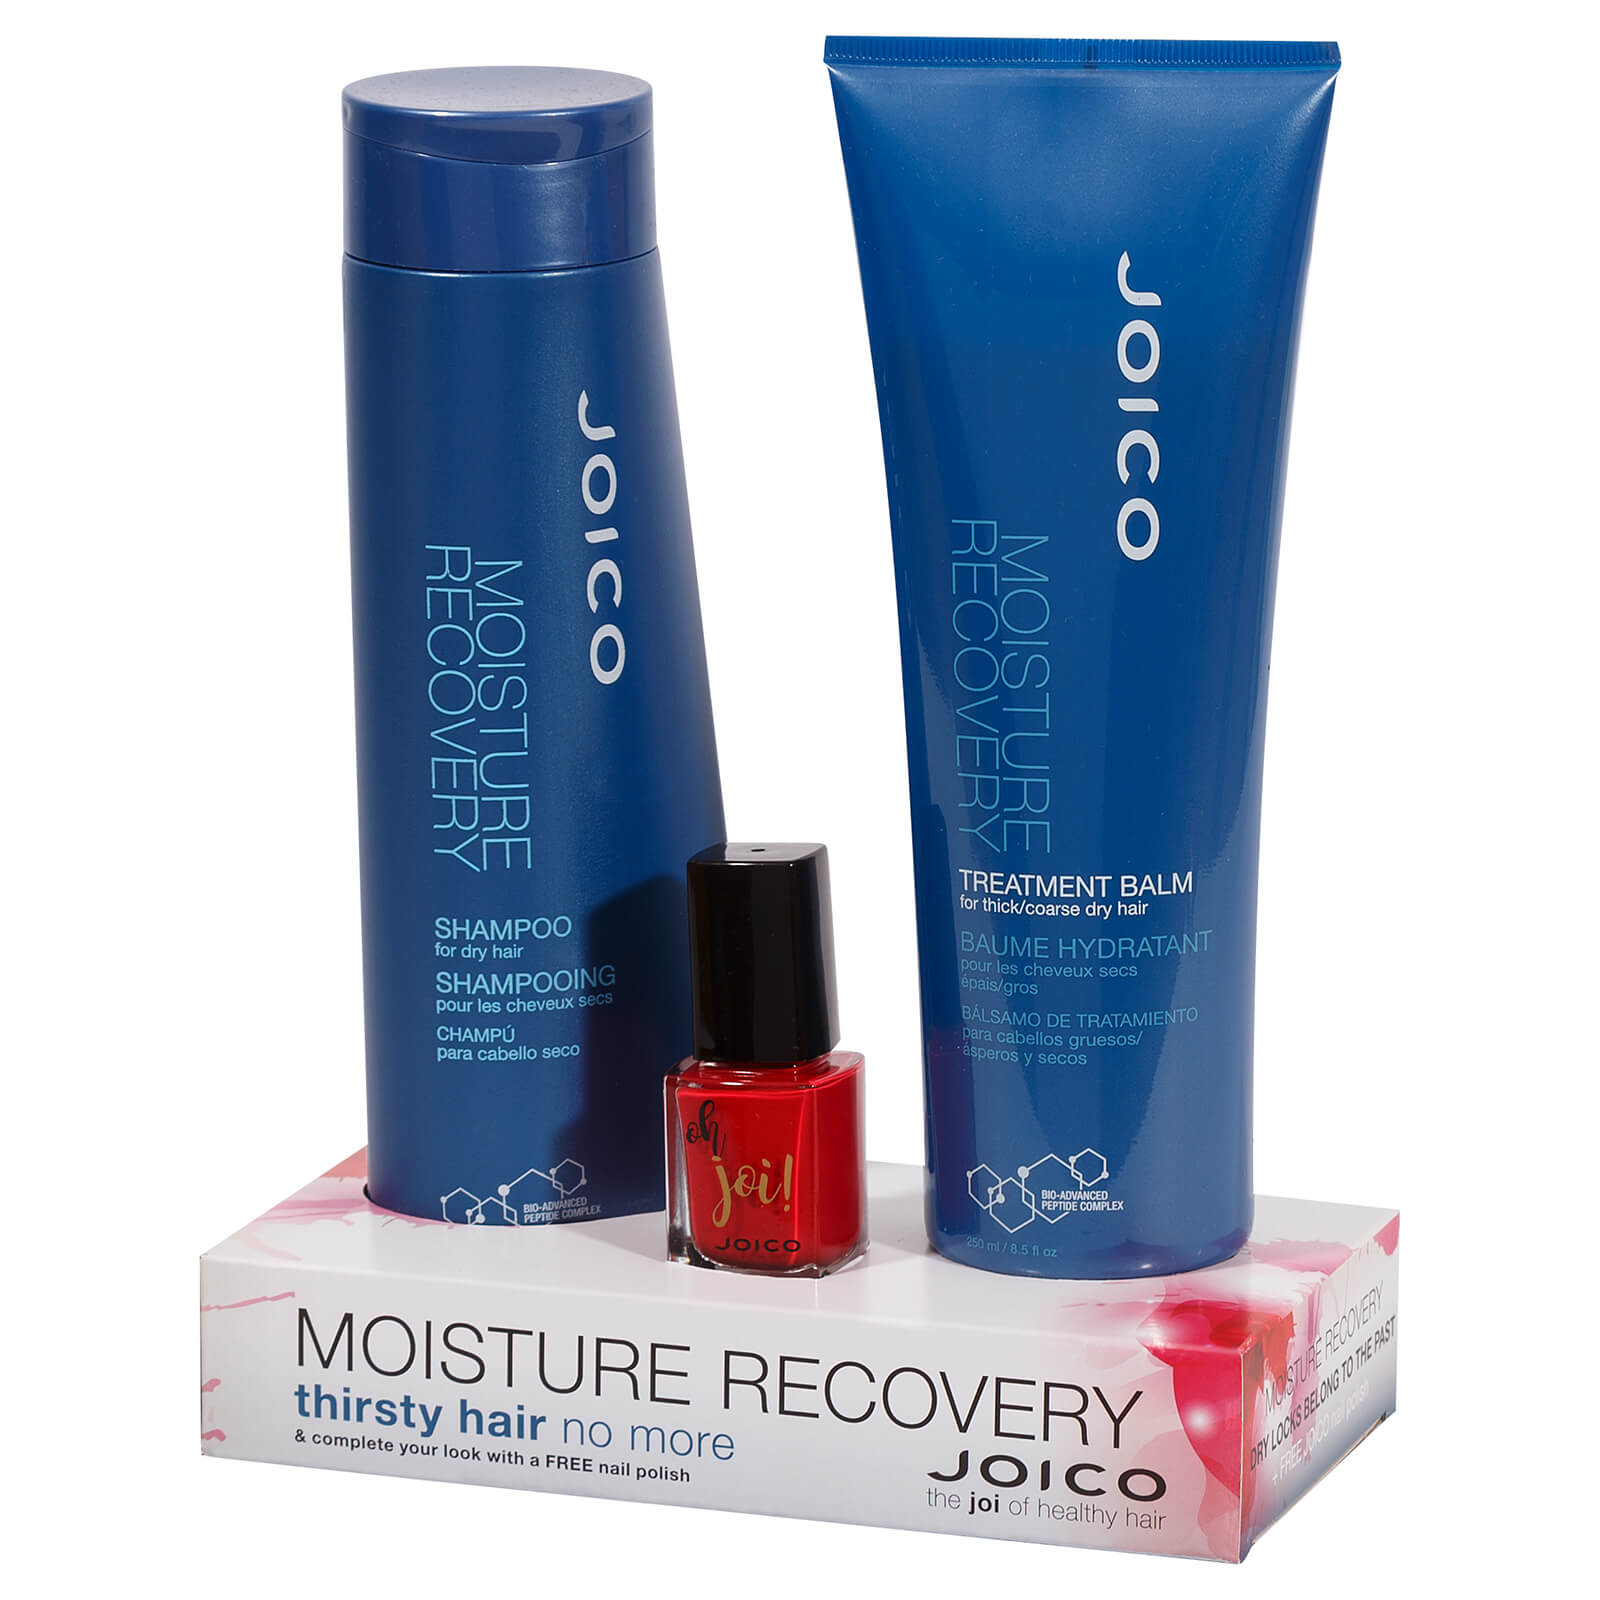 Joico Moisture Recovery and Nail Varnish Bundle